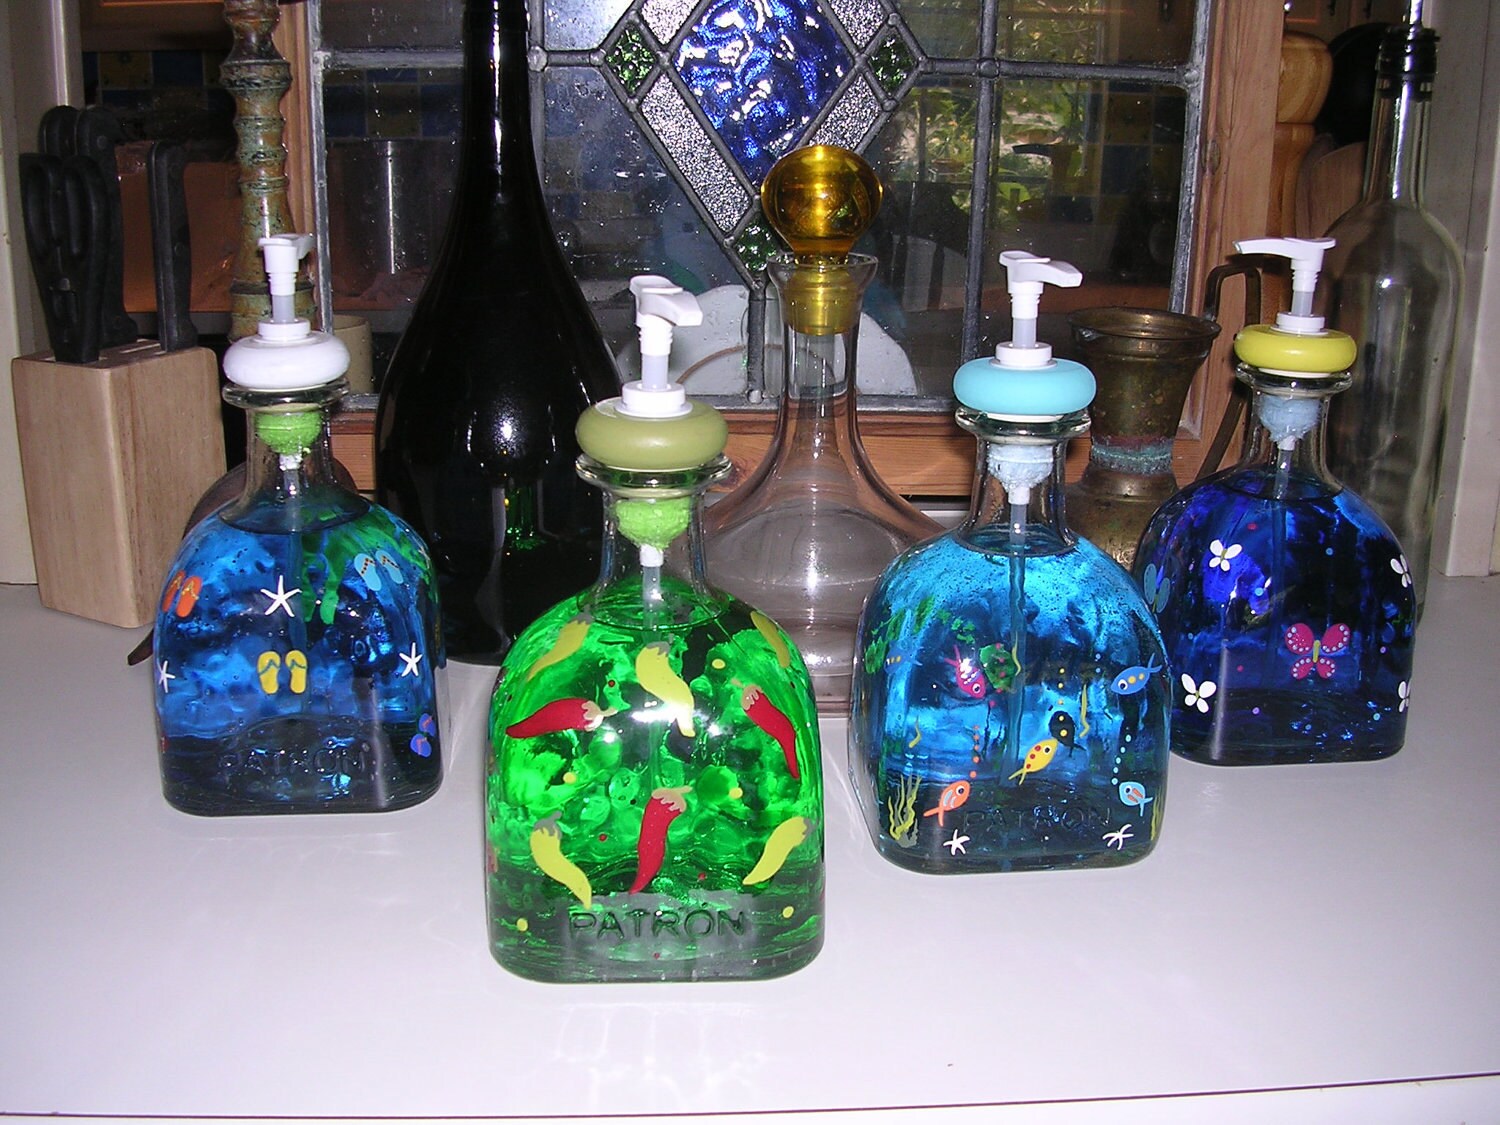 Recycled handpainted glass bottle art Patron tequila lotion